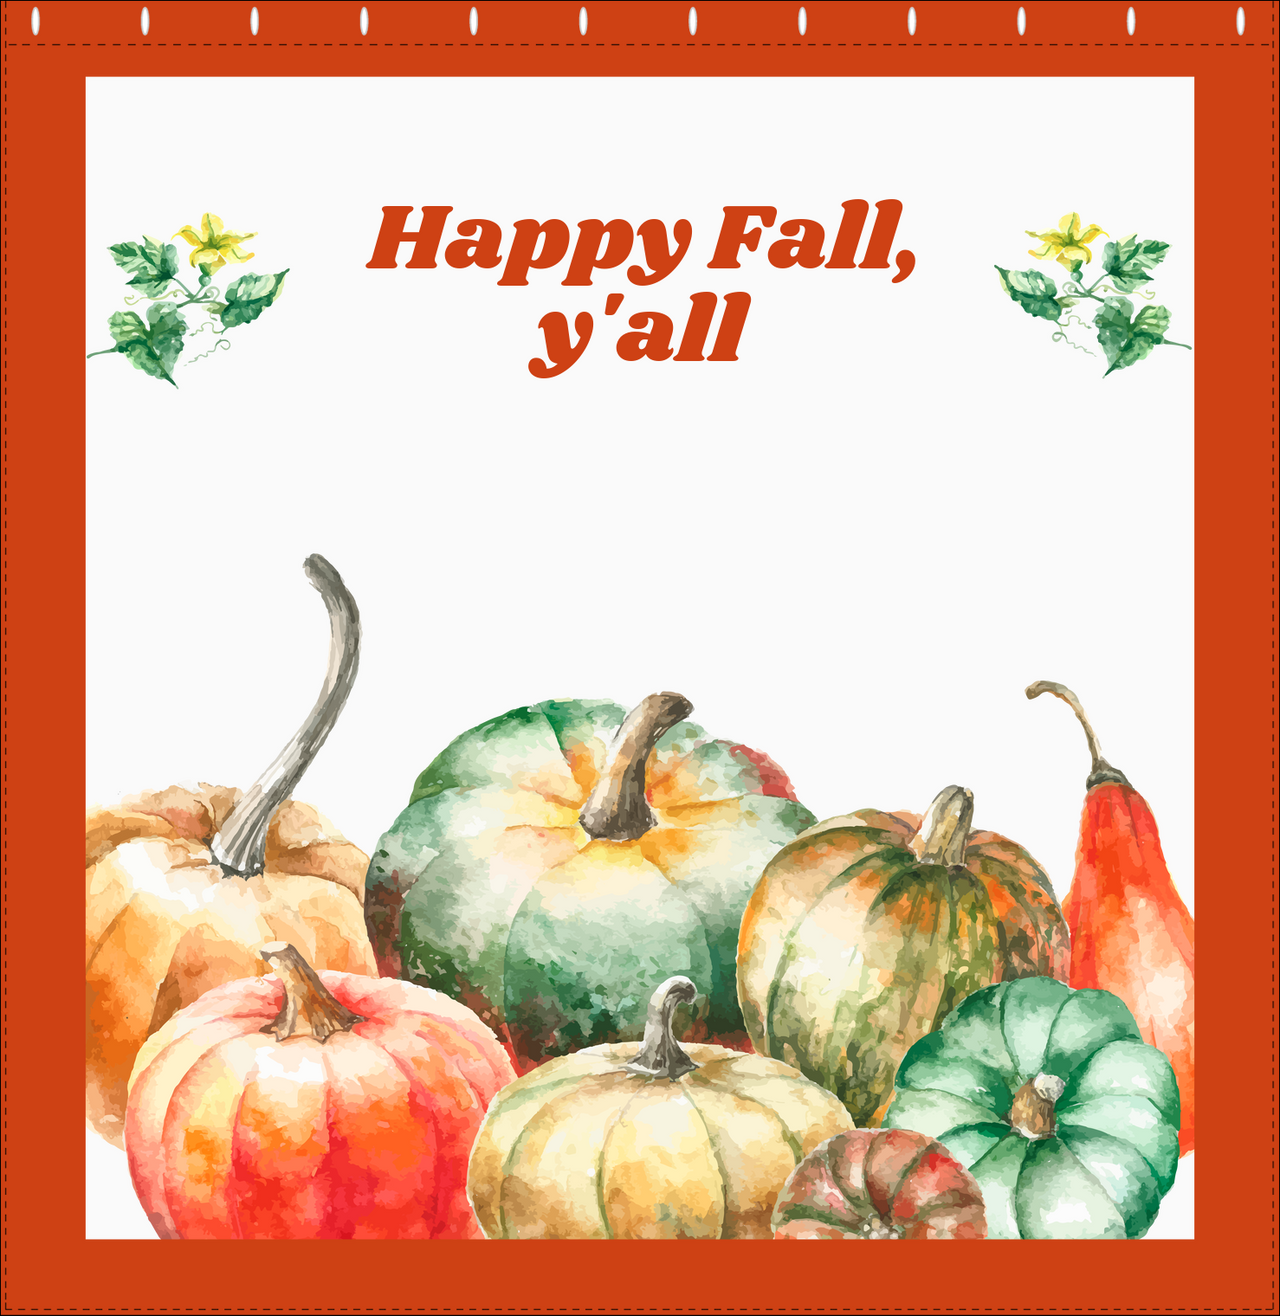 Personalized Pumpkin Shower Curtain - White Background - Pumpkins with Frame I - Decorate View